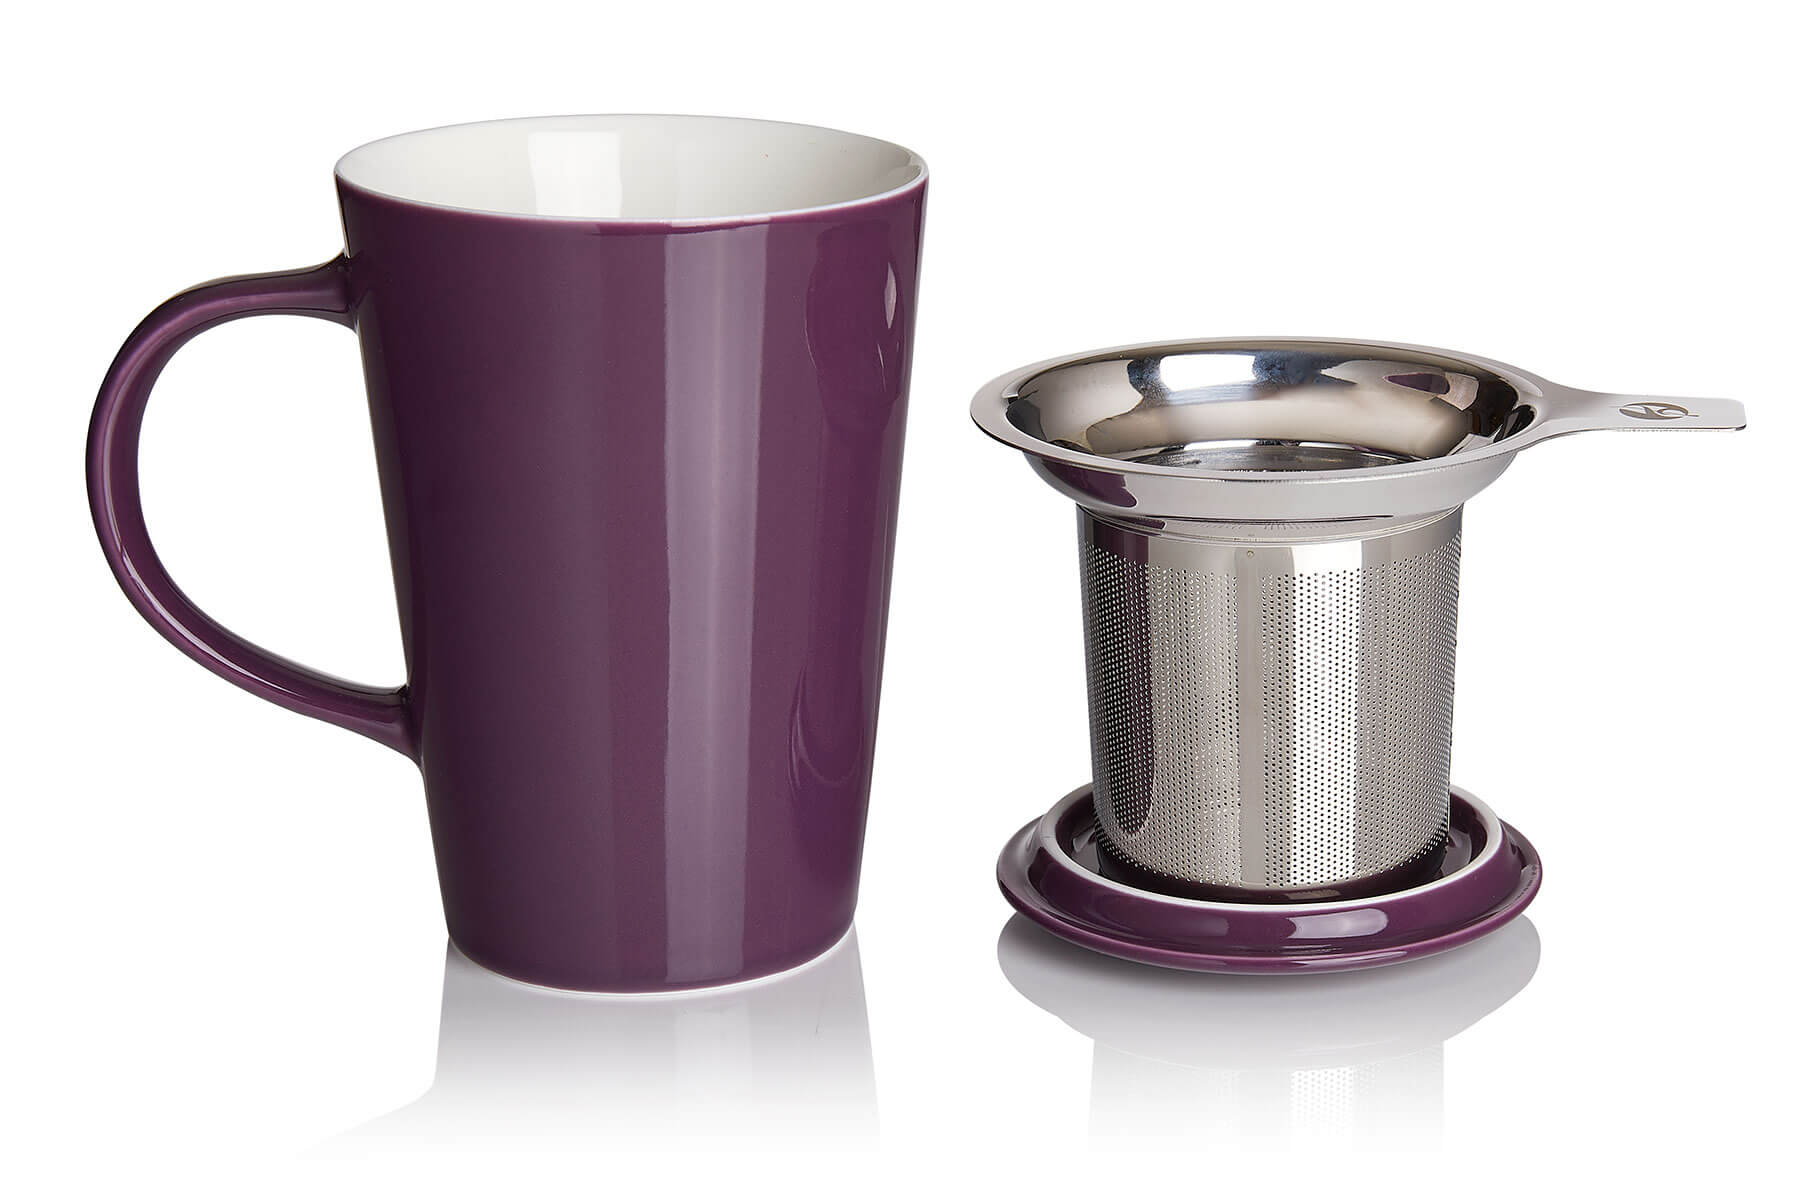 https://www.adagio.com/images5/products_retina/porcelain_cup_and_infuser_plum.jpg